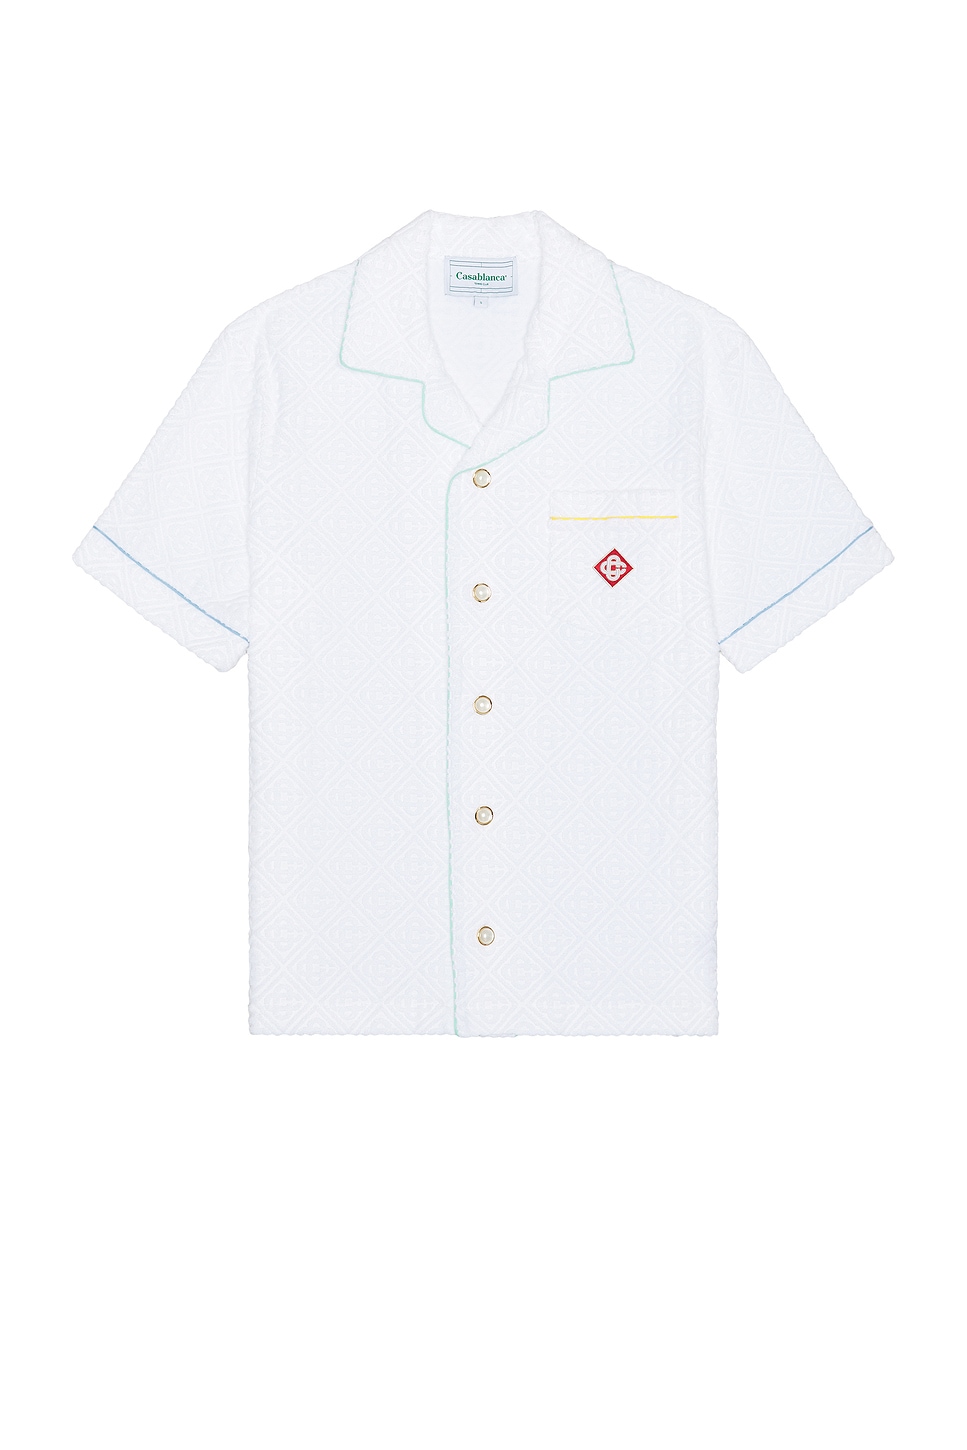 Towelling Short Sleeve Shirt in White